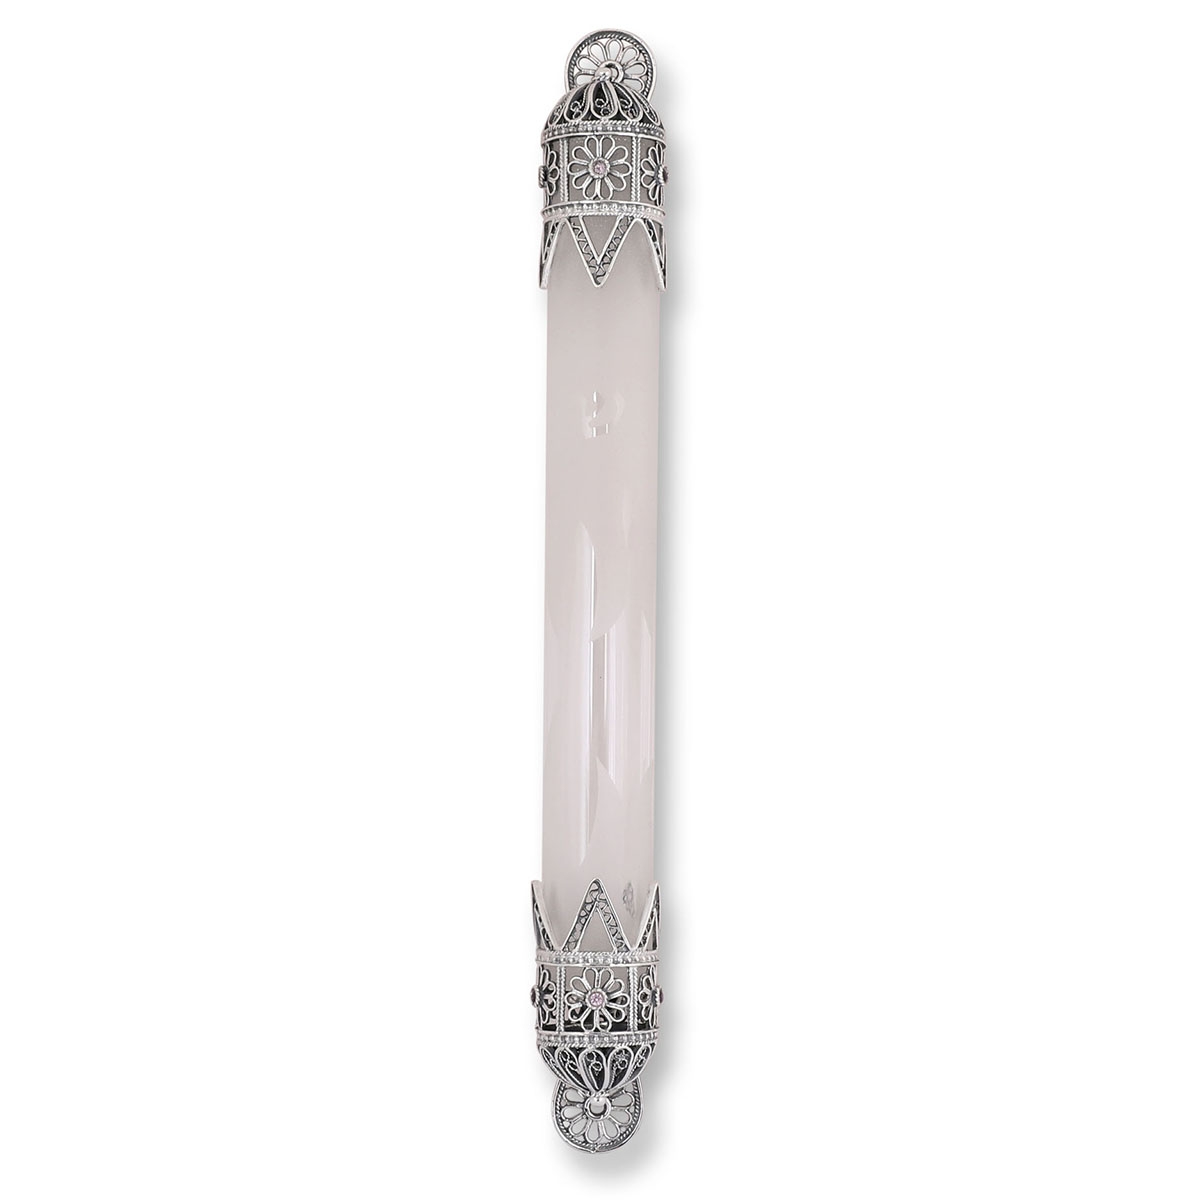 Rafael Jewelry Large Floral 925 Sterling Silver and Glass Mezuzah Case - 1